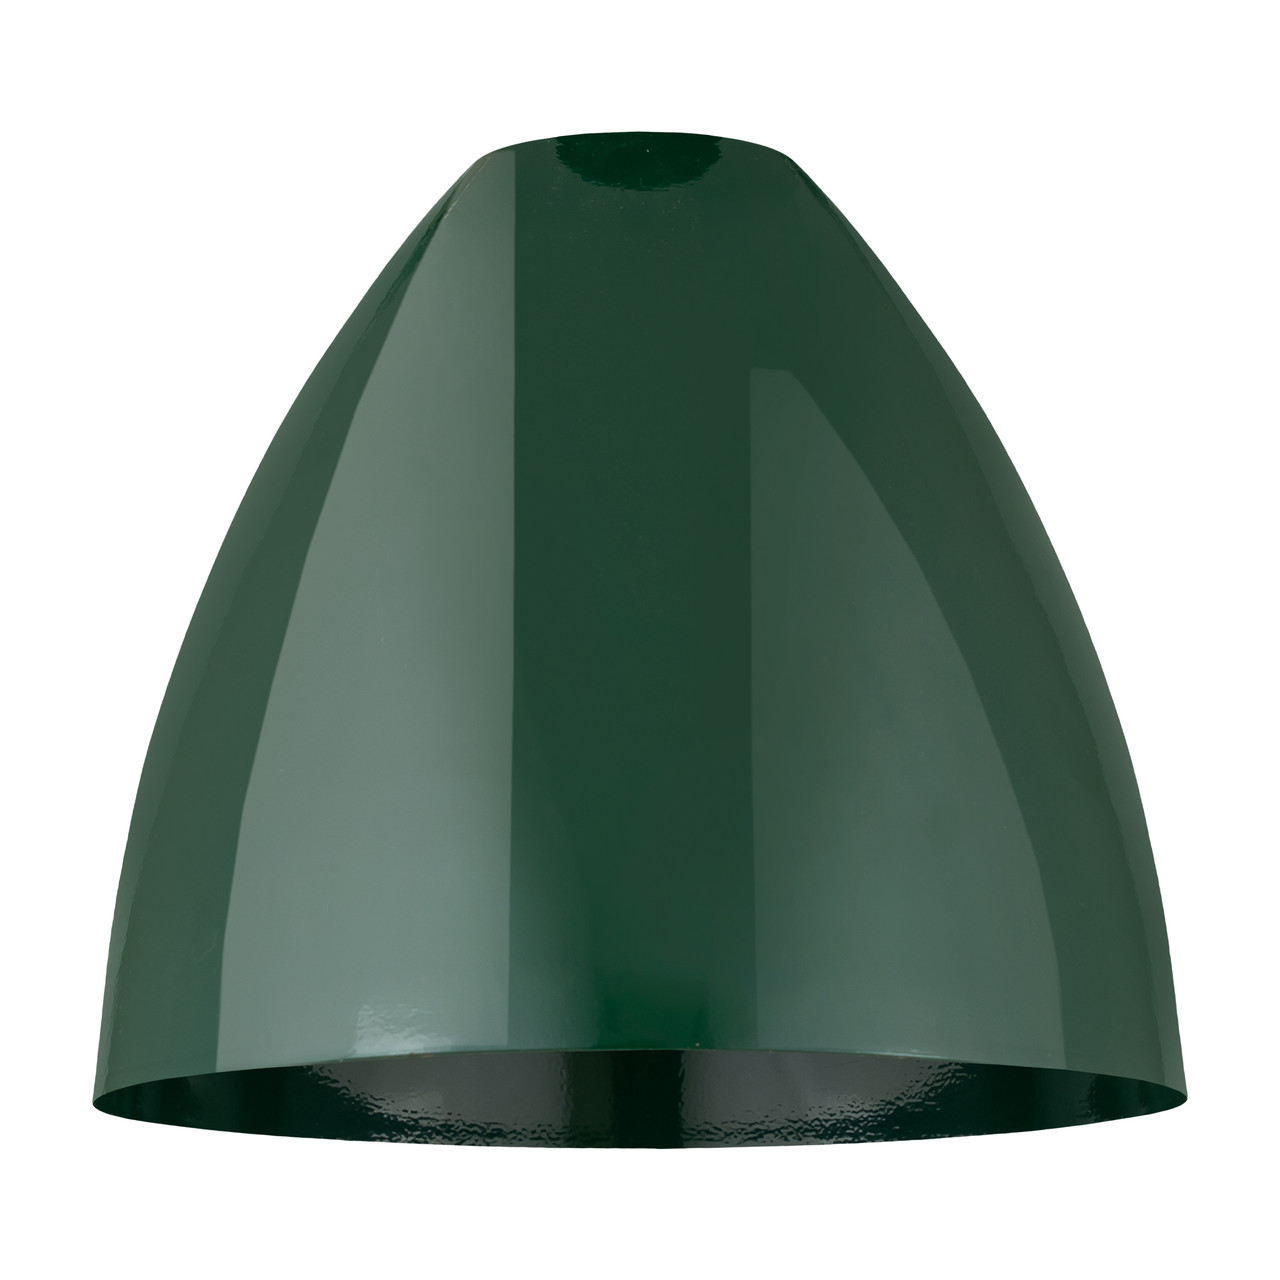 INNOVATIONS MBD-12-GR Plymouth Dome Light 12 inch Green Metal Shade